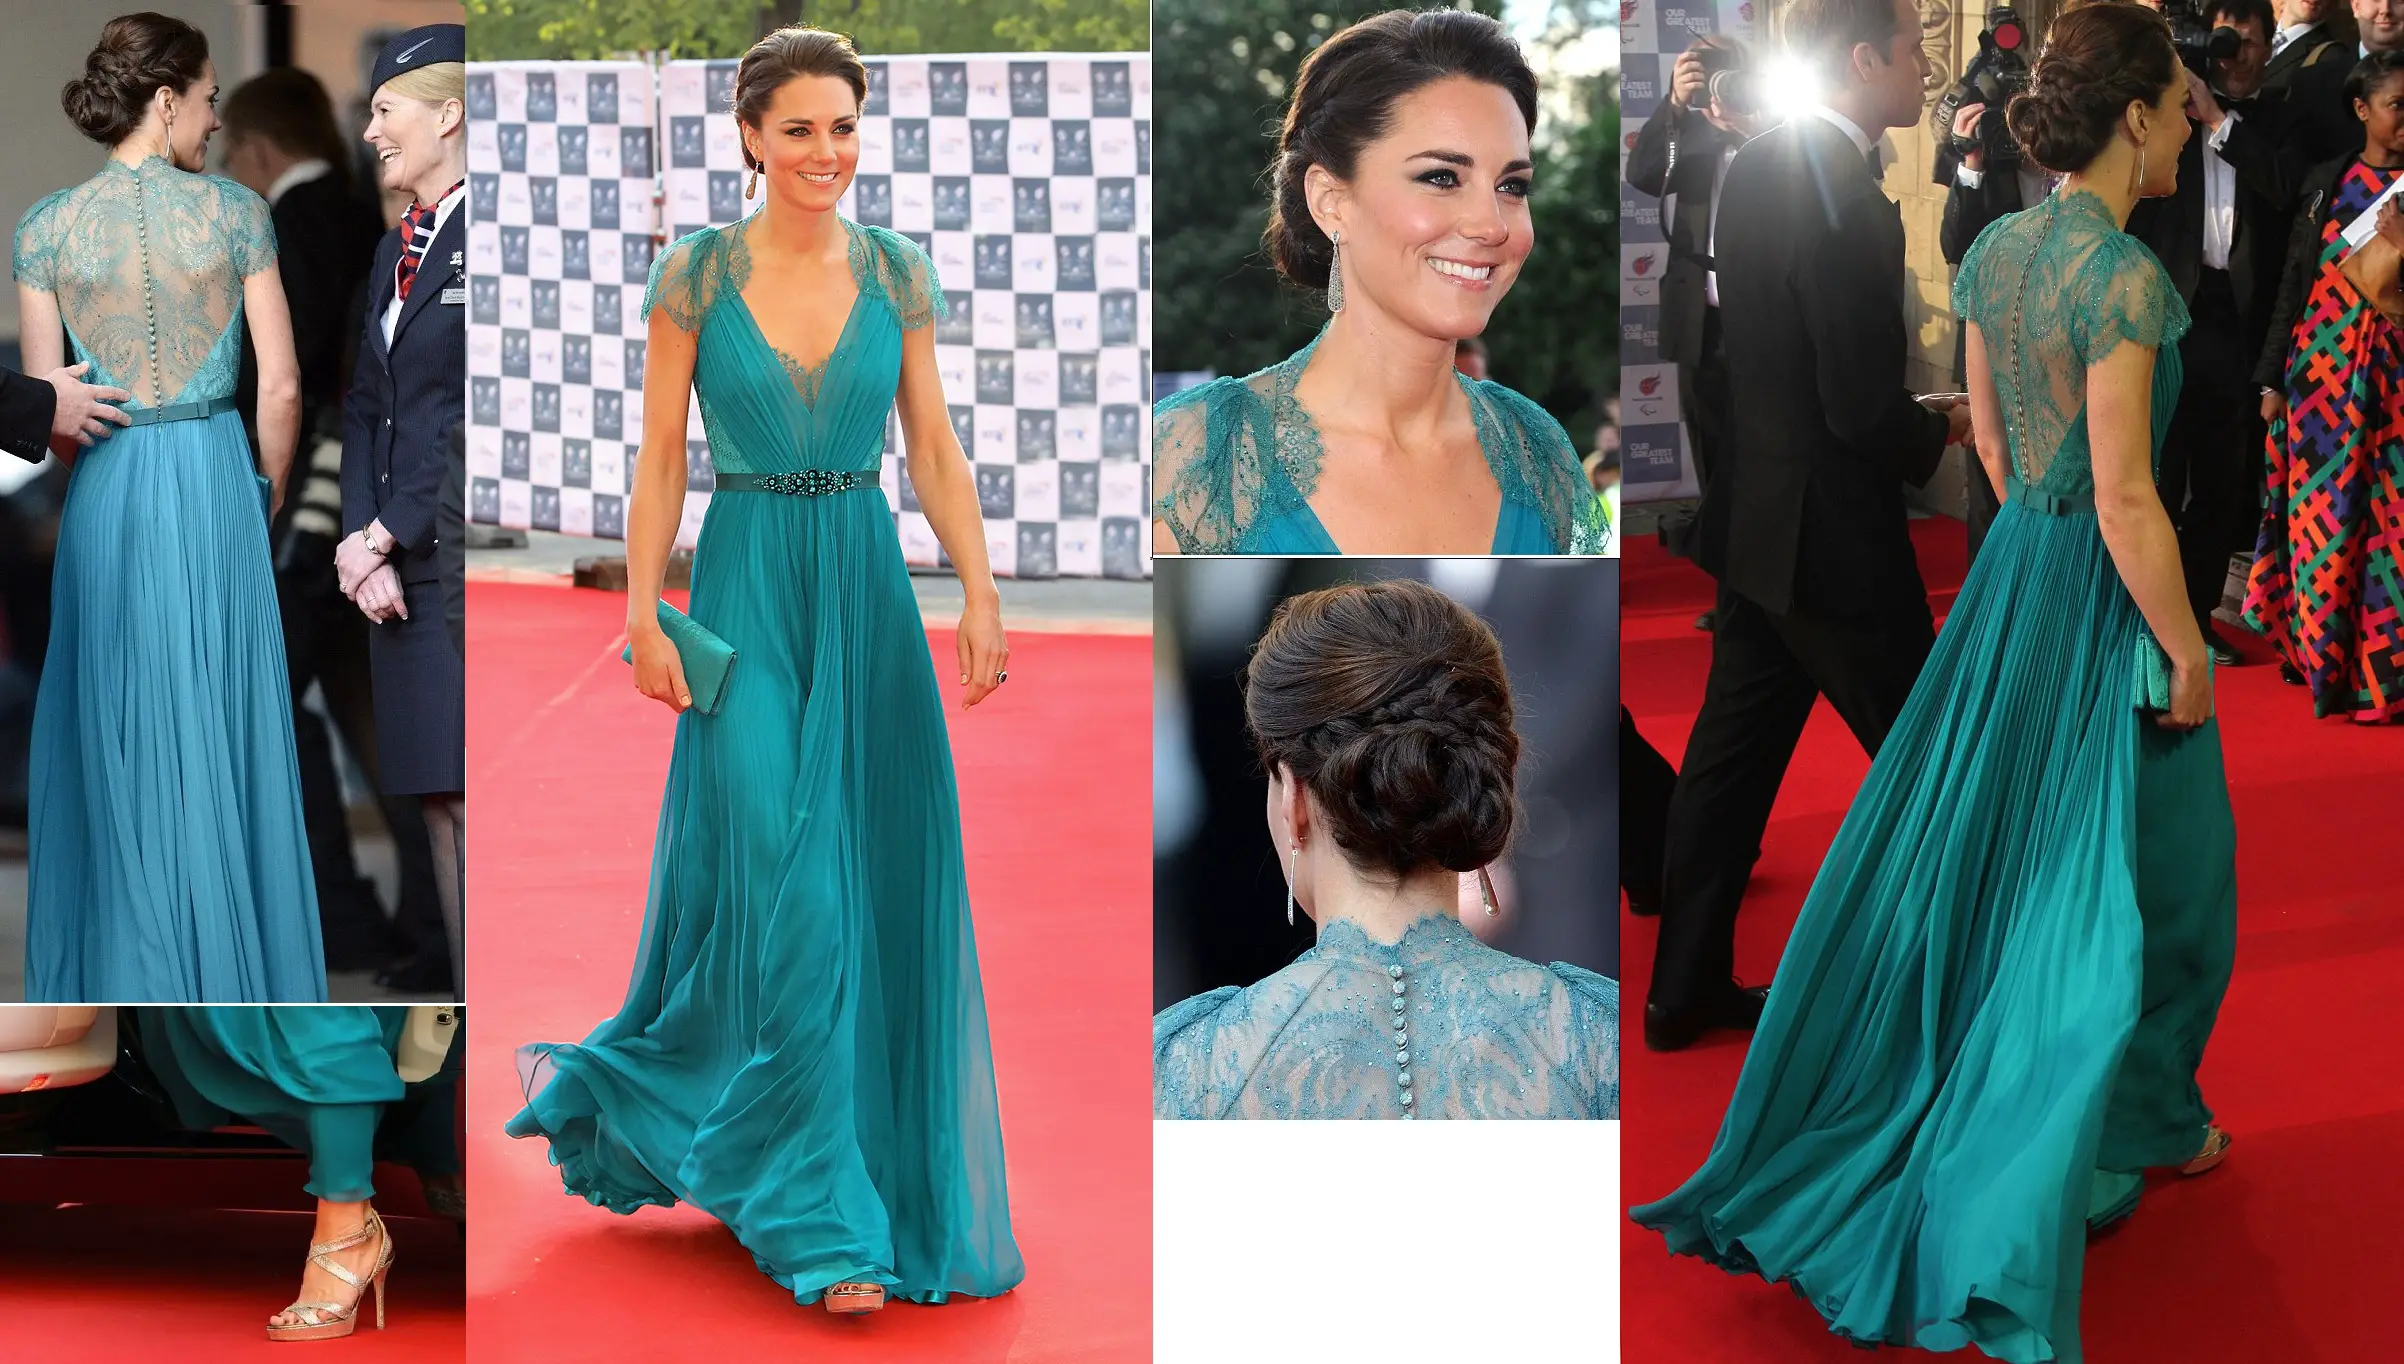 The Duchess of Cambridge wore a stunning Jenny Packham gown at Olympic Gala in 2012